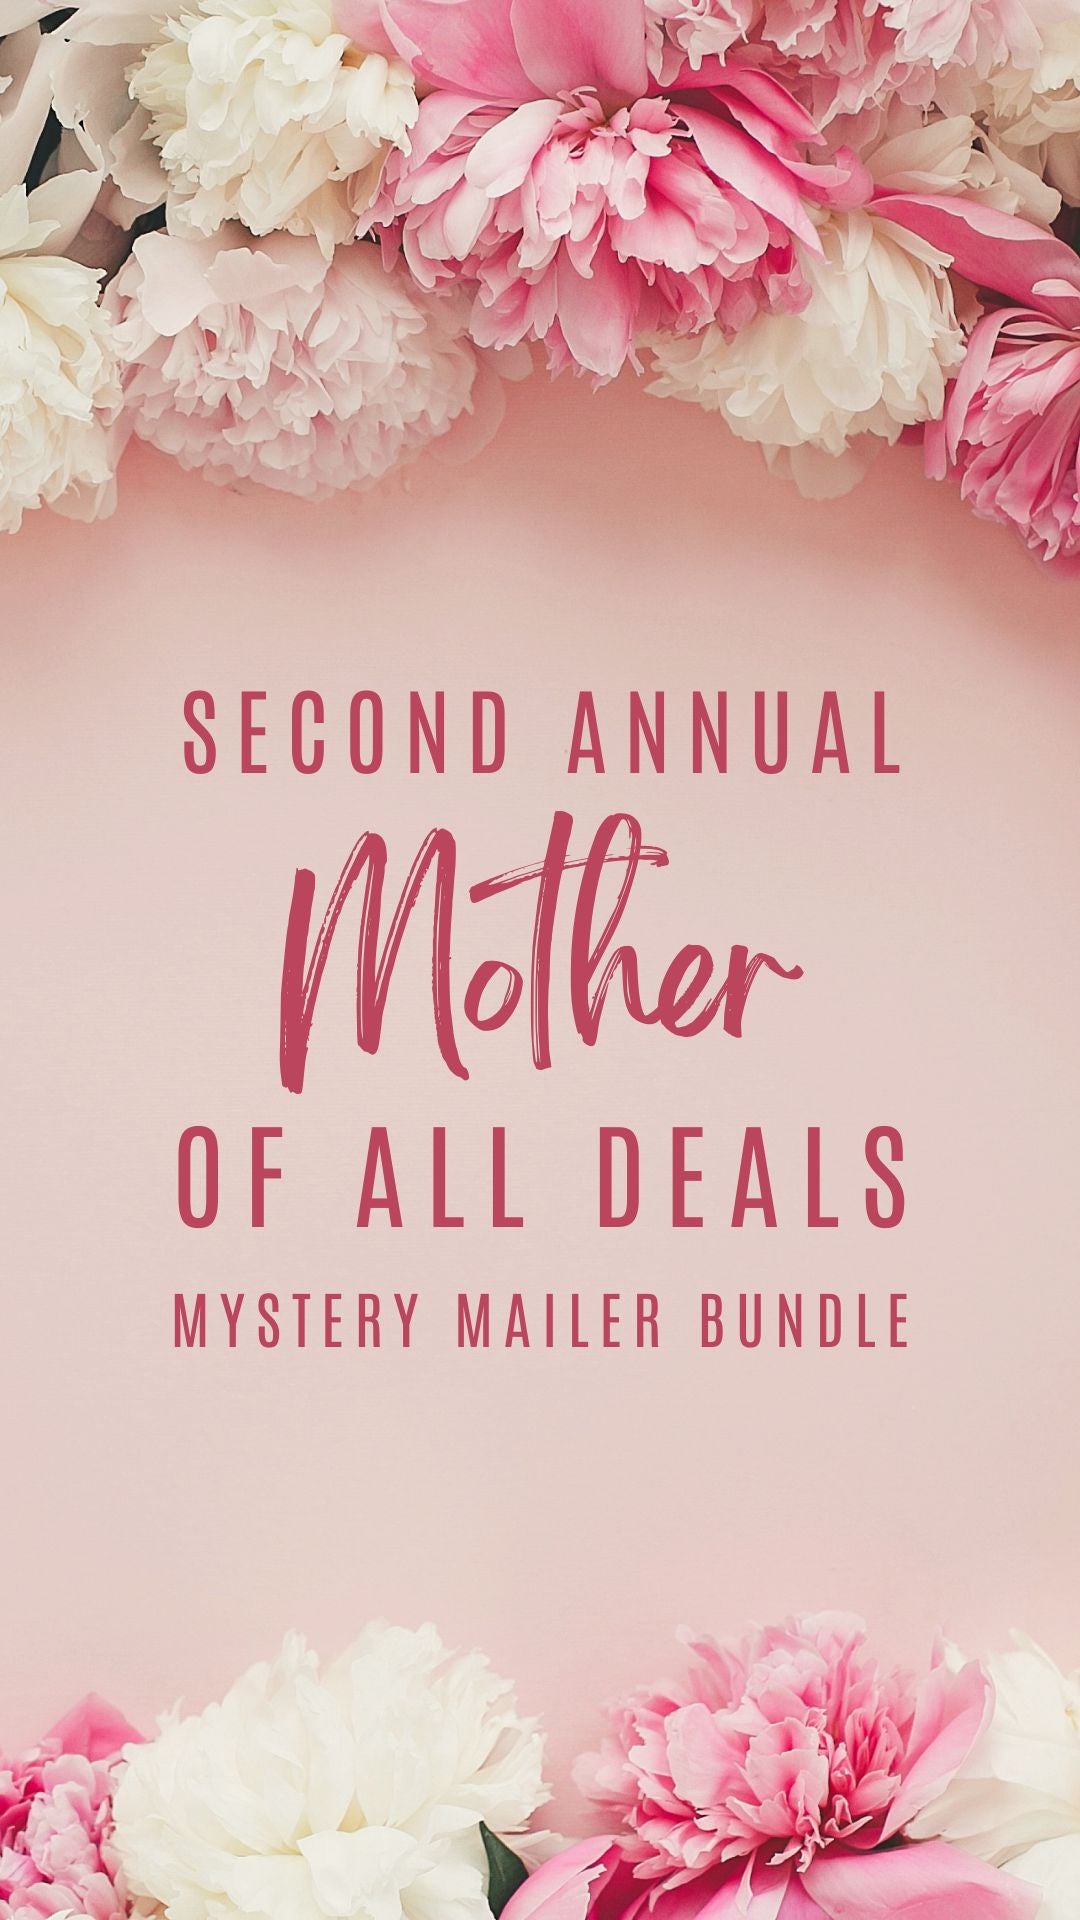 Second Annual Mother of All Deals: Mother's Day Mystery Mailer Bundle